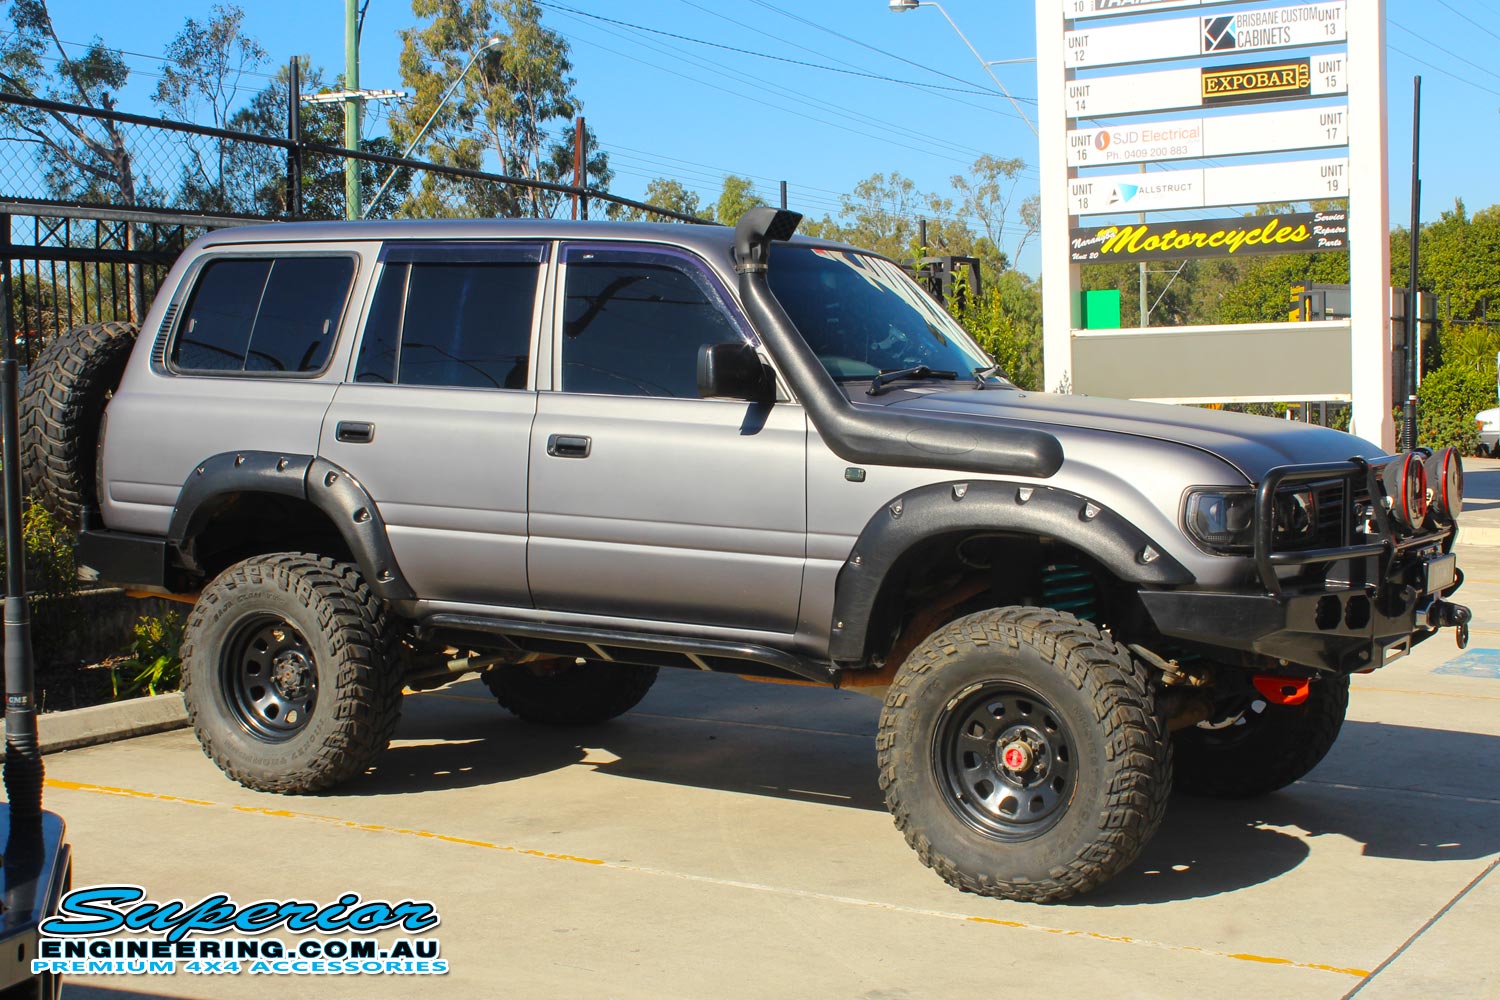 Right side view of a 80 Series Toyota Landcruiser fitted with a set of Dobinsons coil springs out the front of the Deception Bay 4wd retail store